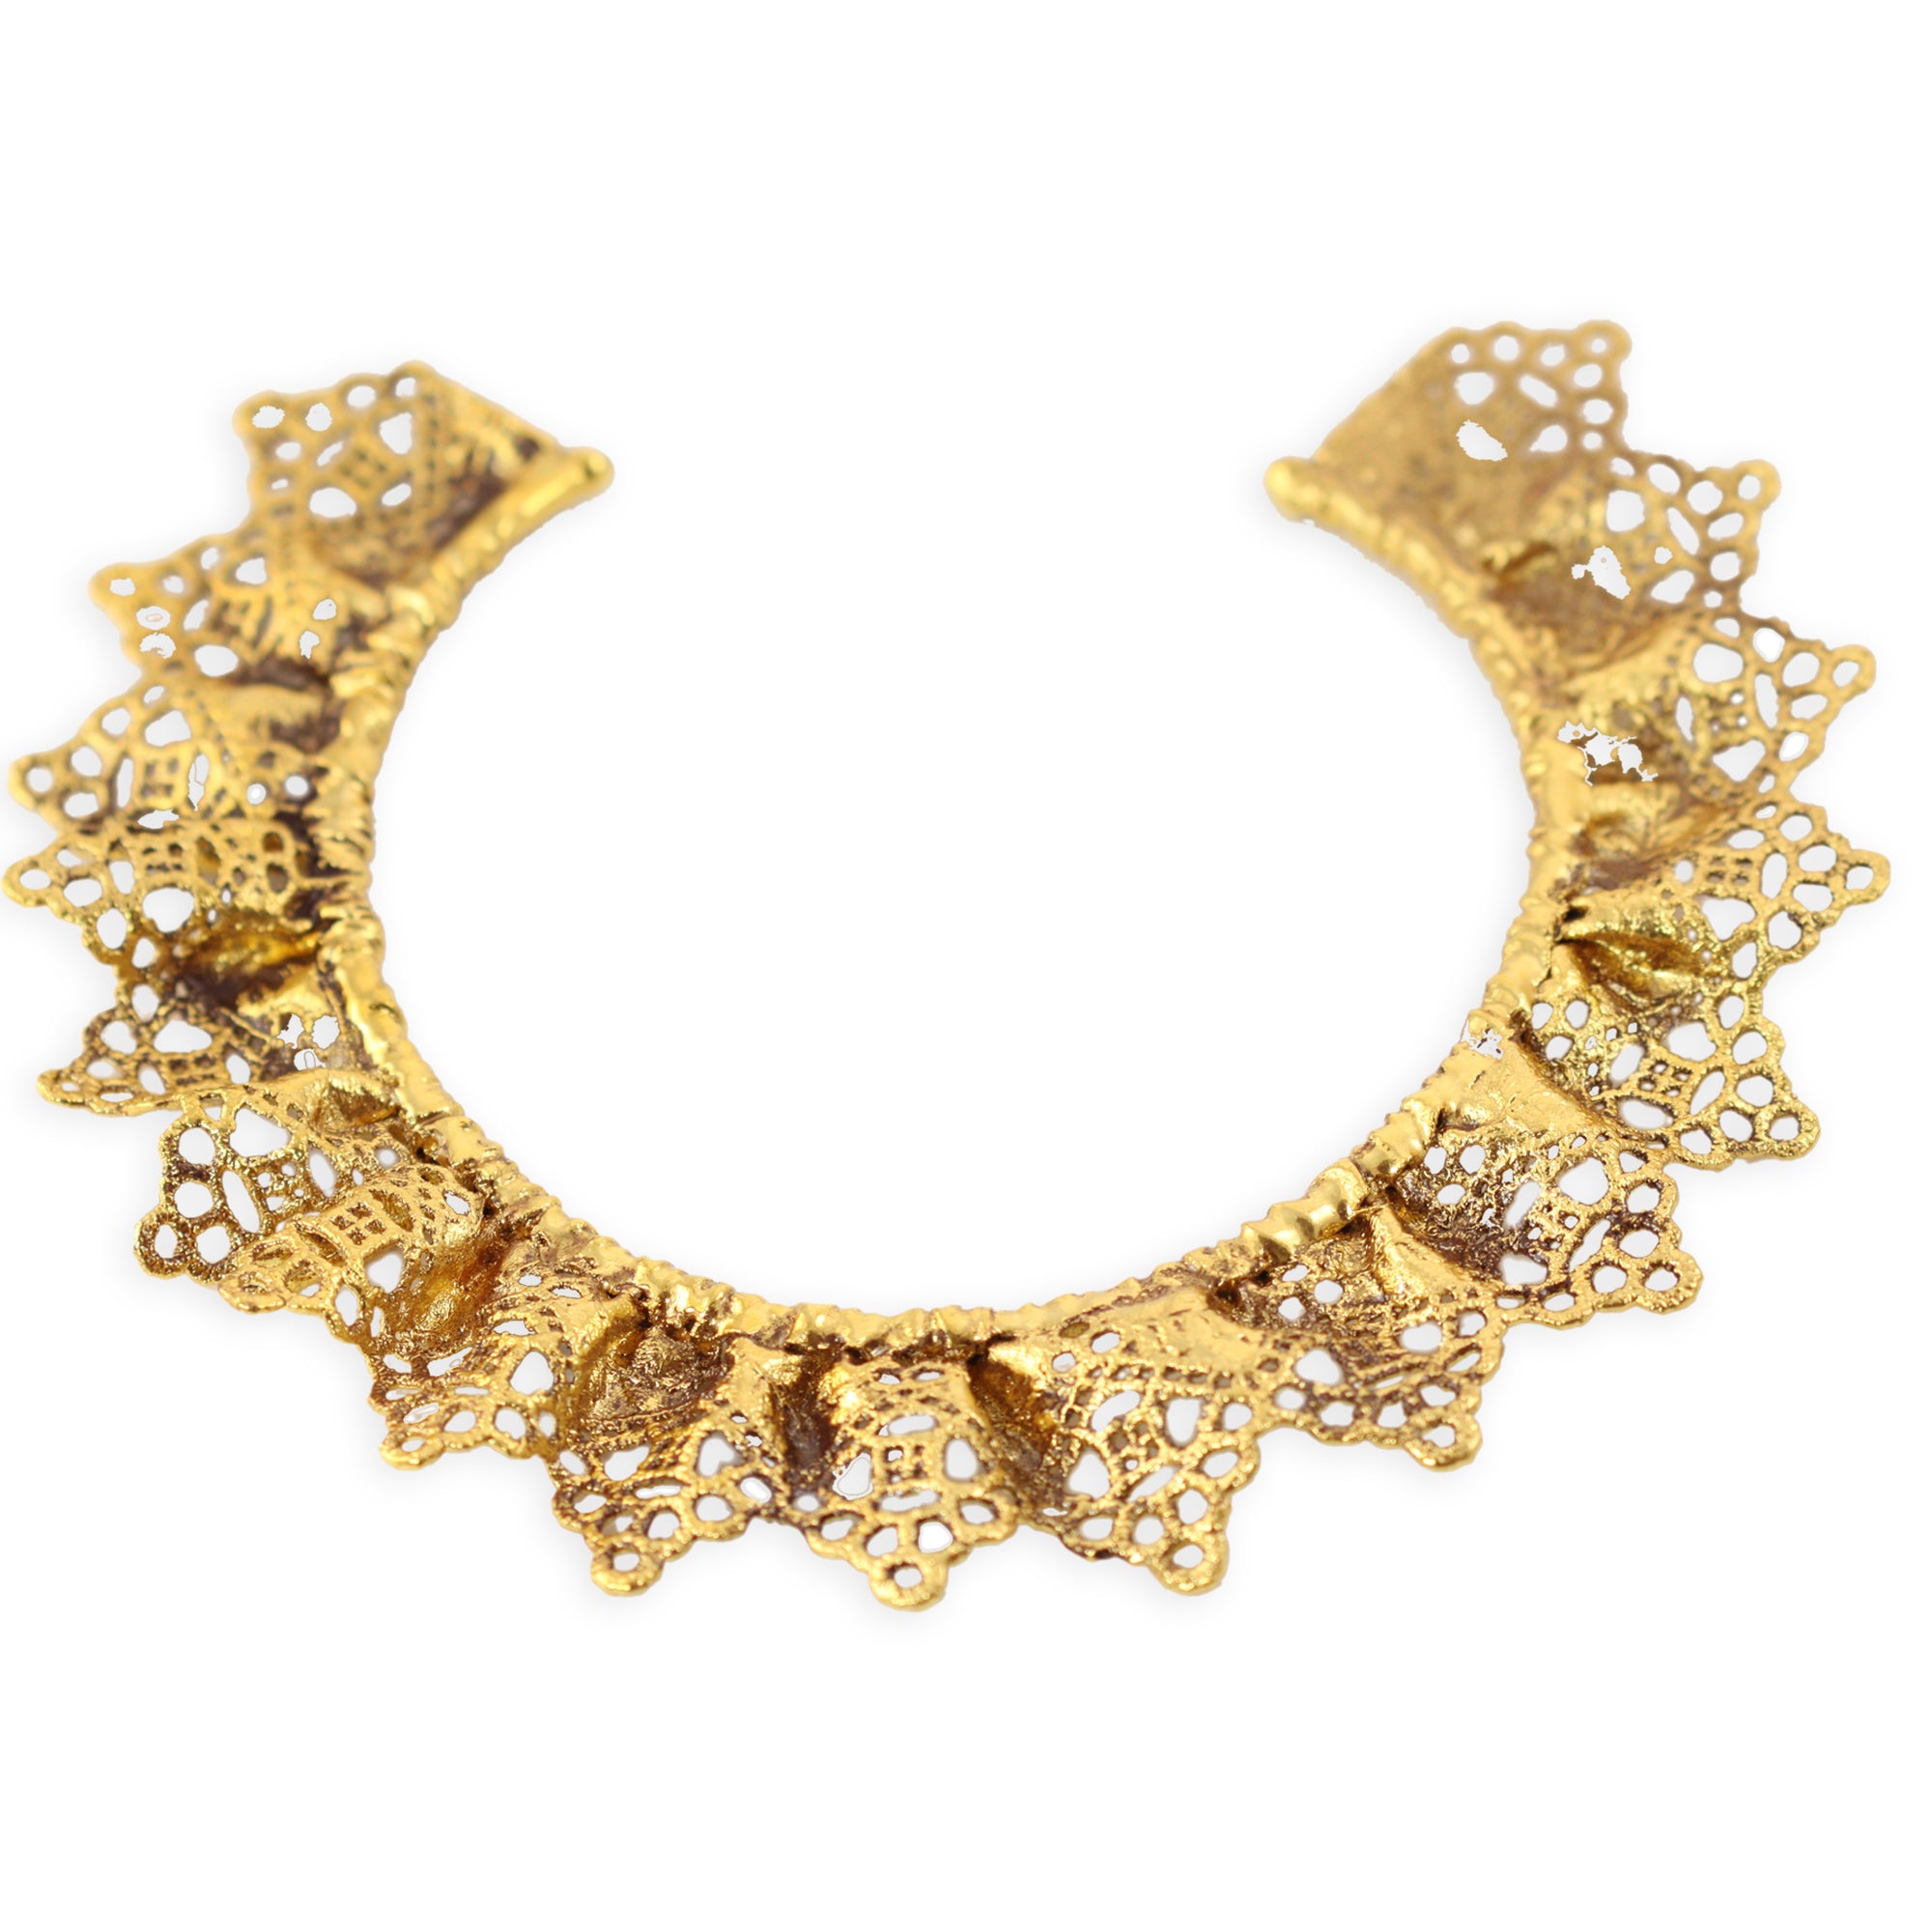 Lace Collar necklace dipped in 24k gold.